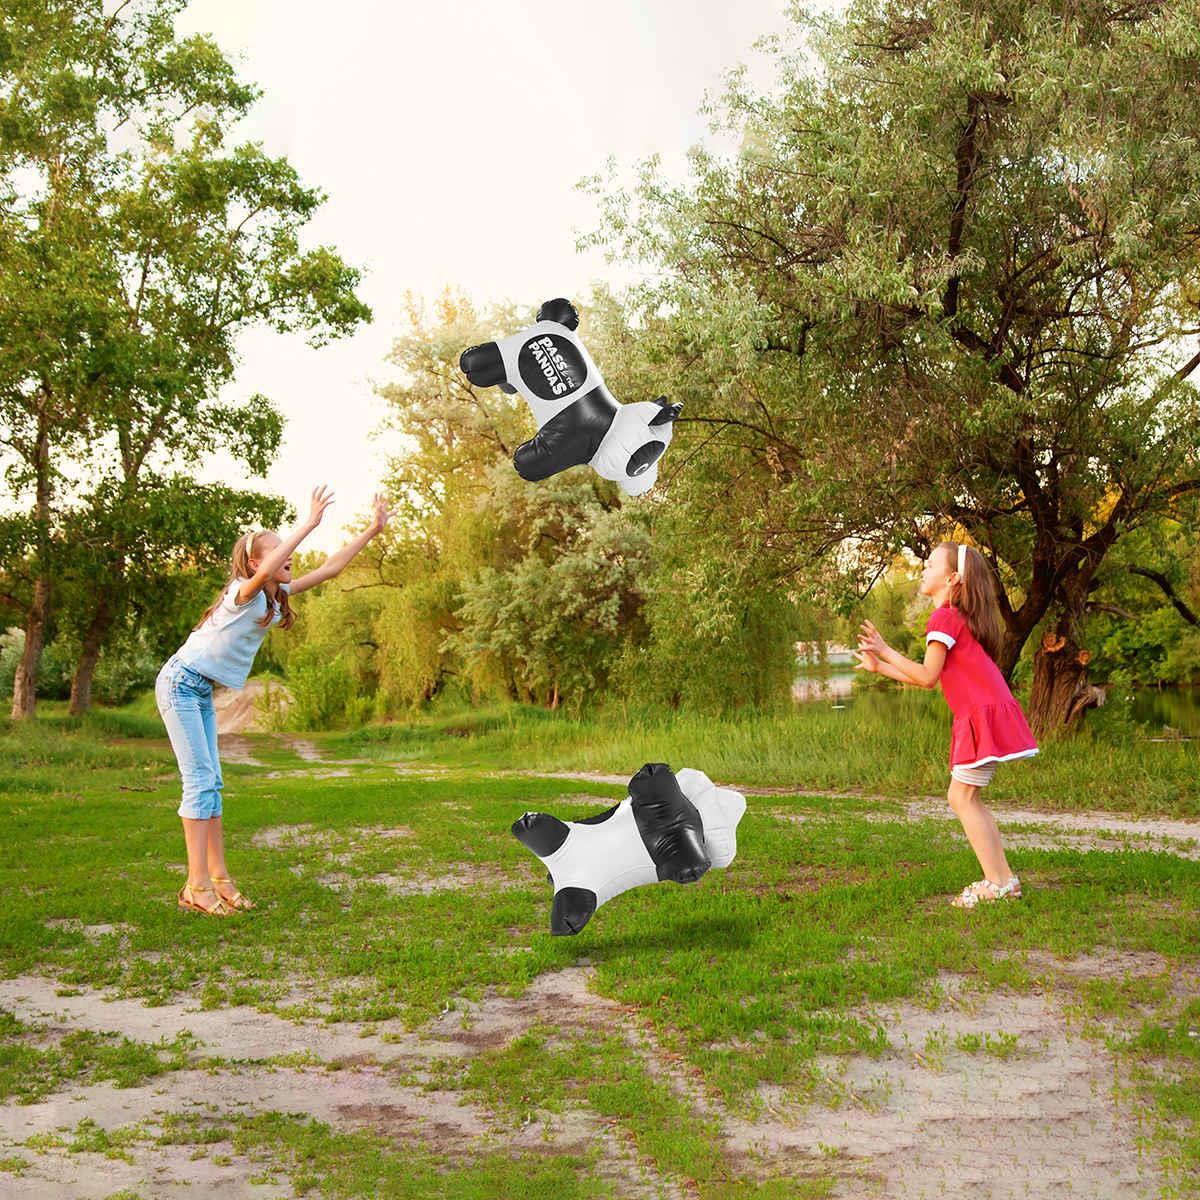 Giant Pass the Pandas Inflatable Dice Game